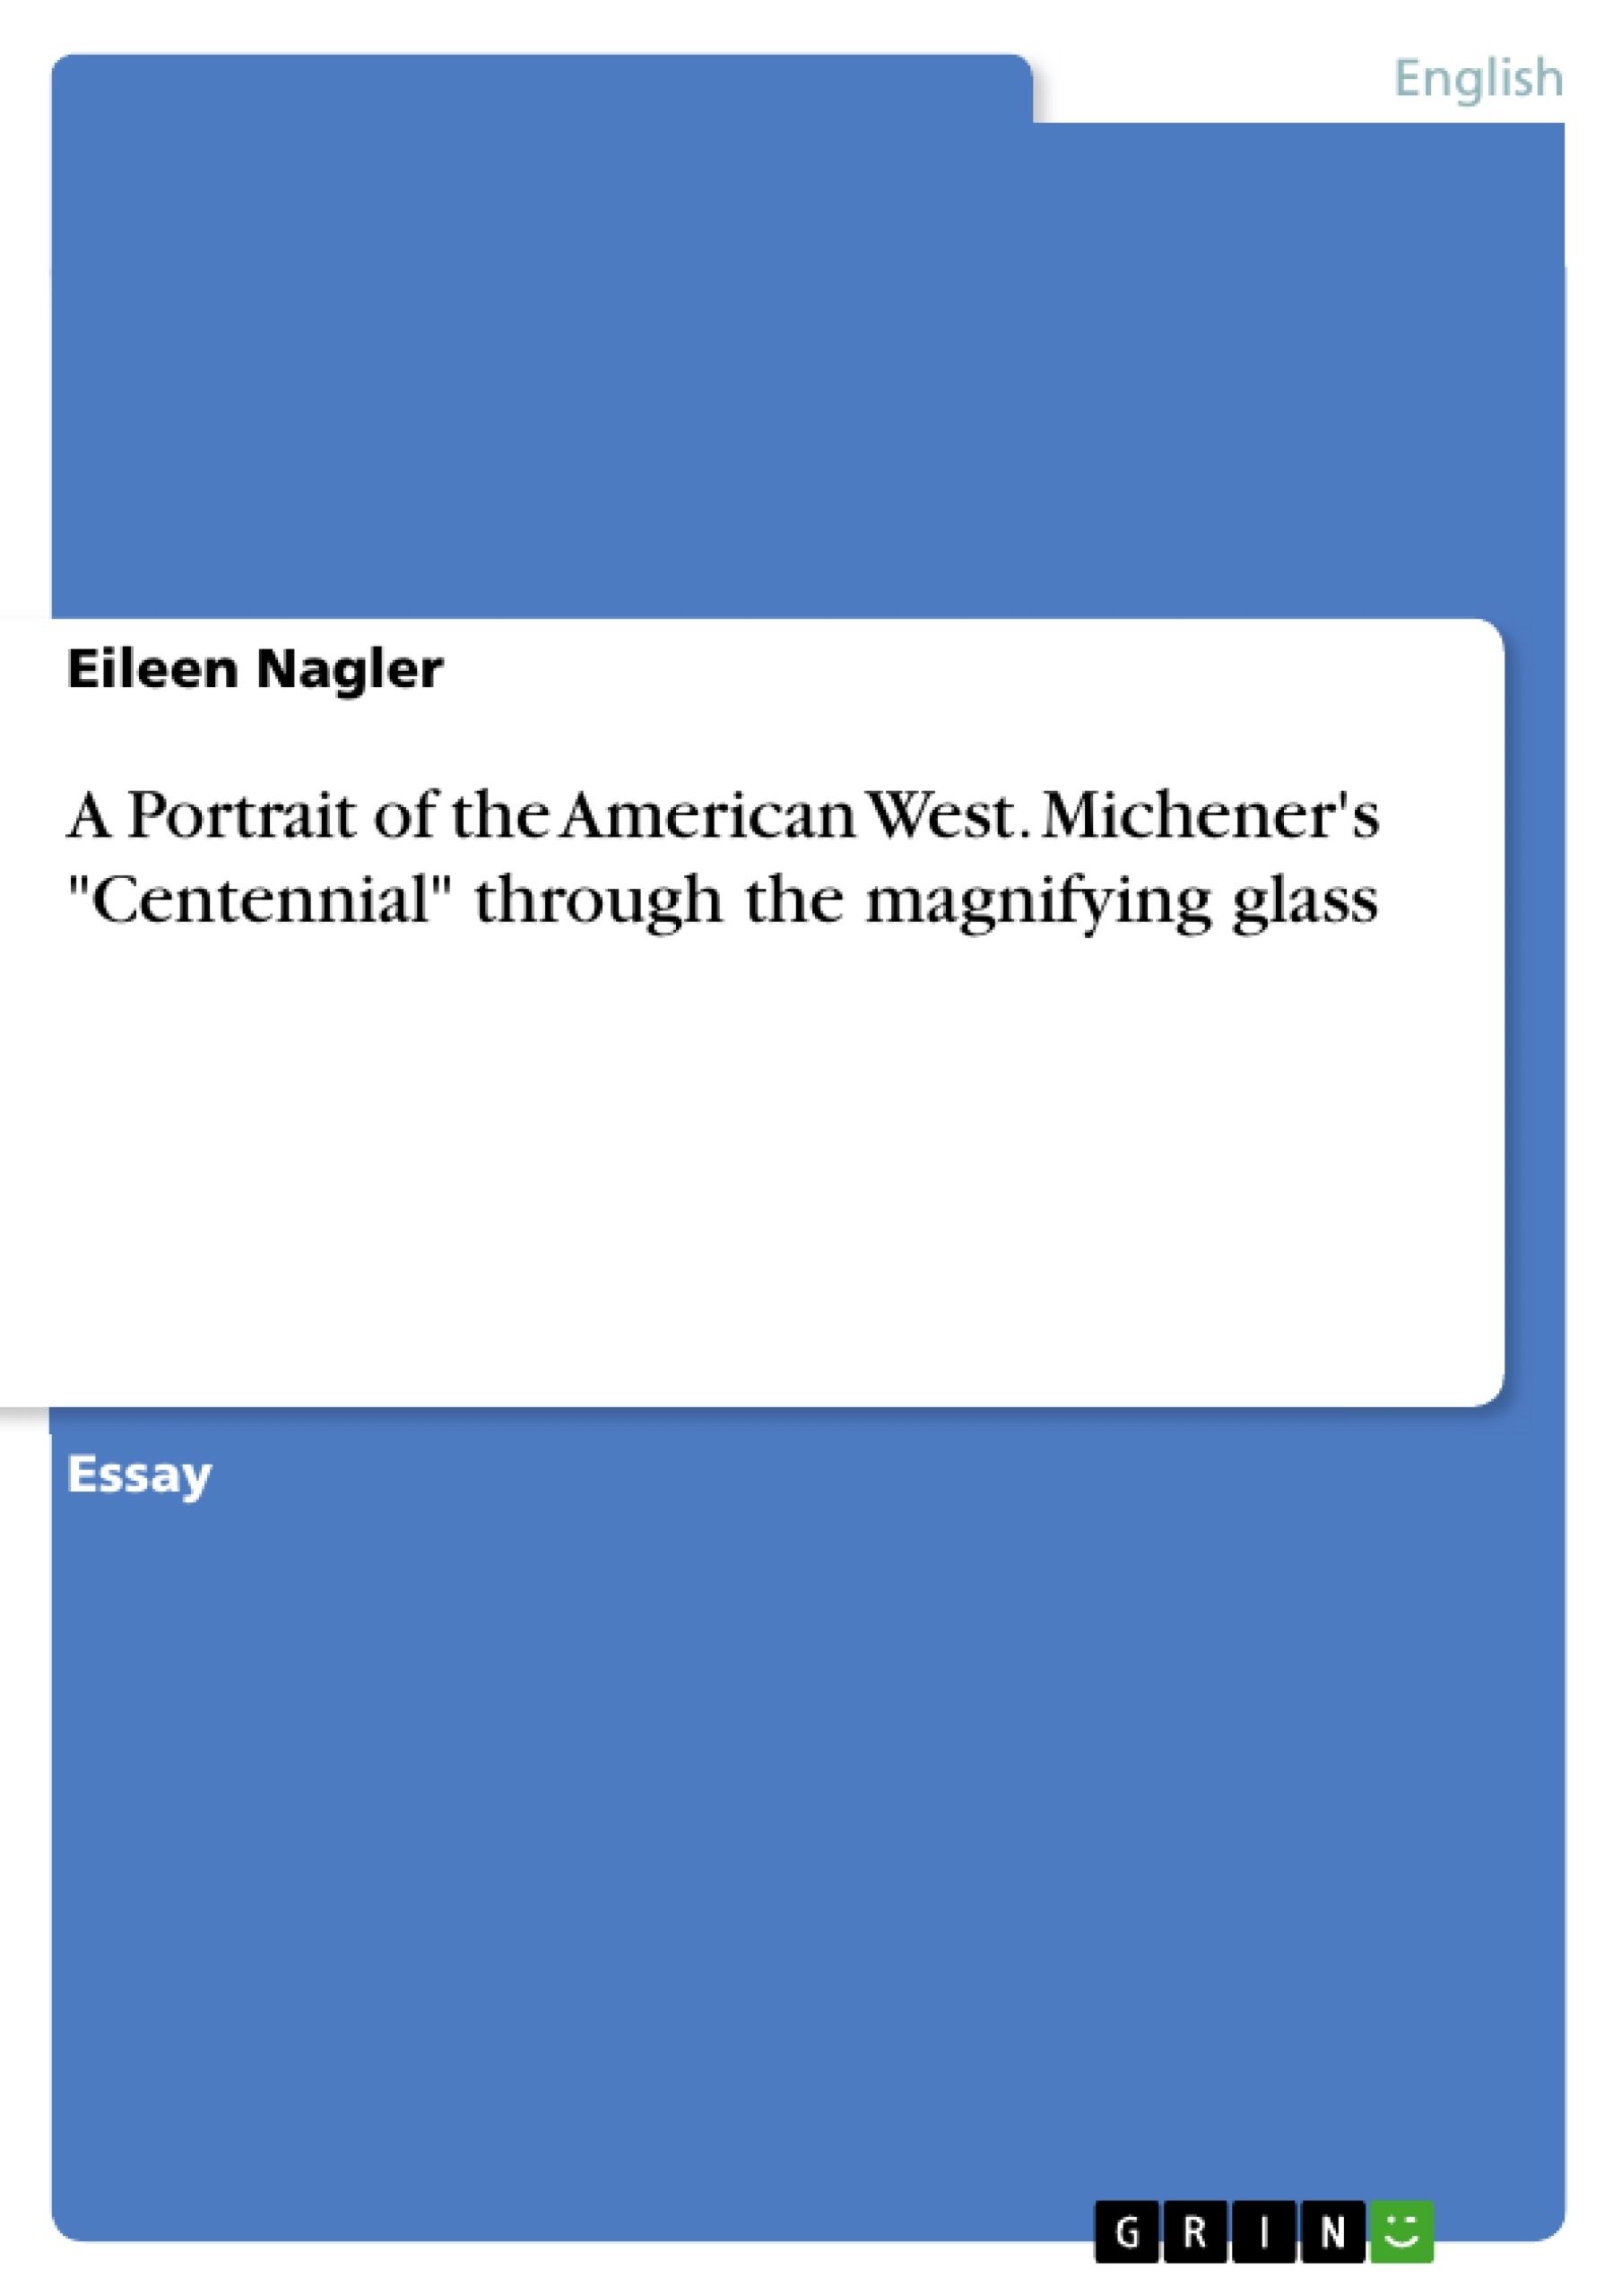 Title: A Portrait of the American West. Michener's "Centennial" through the magnifying glass